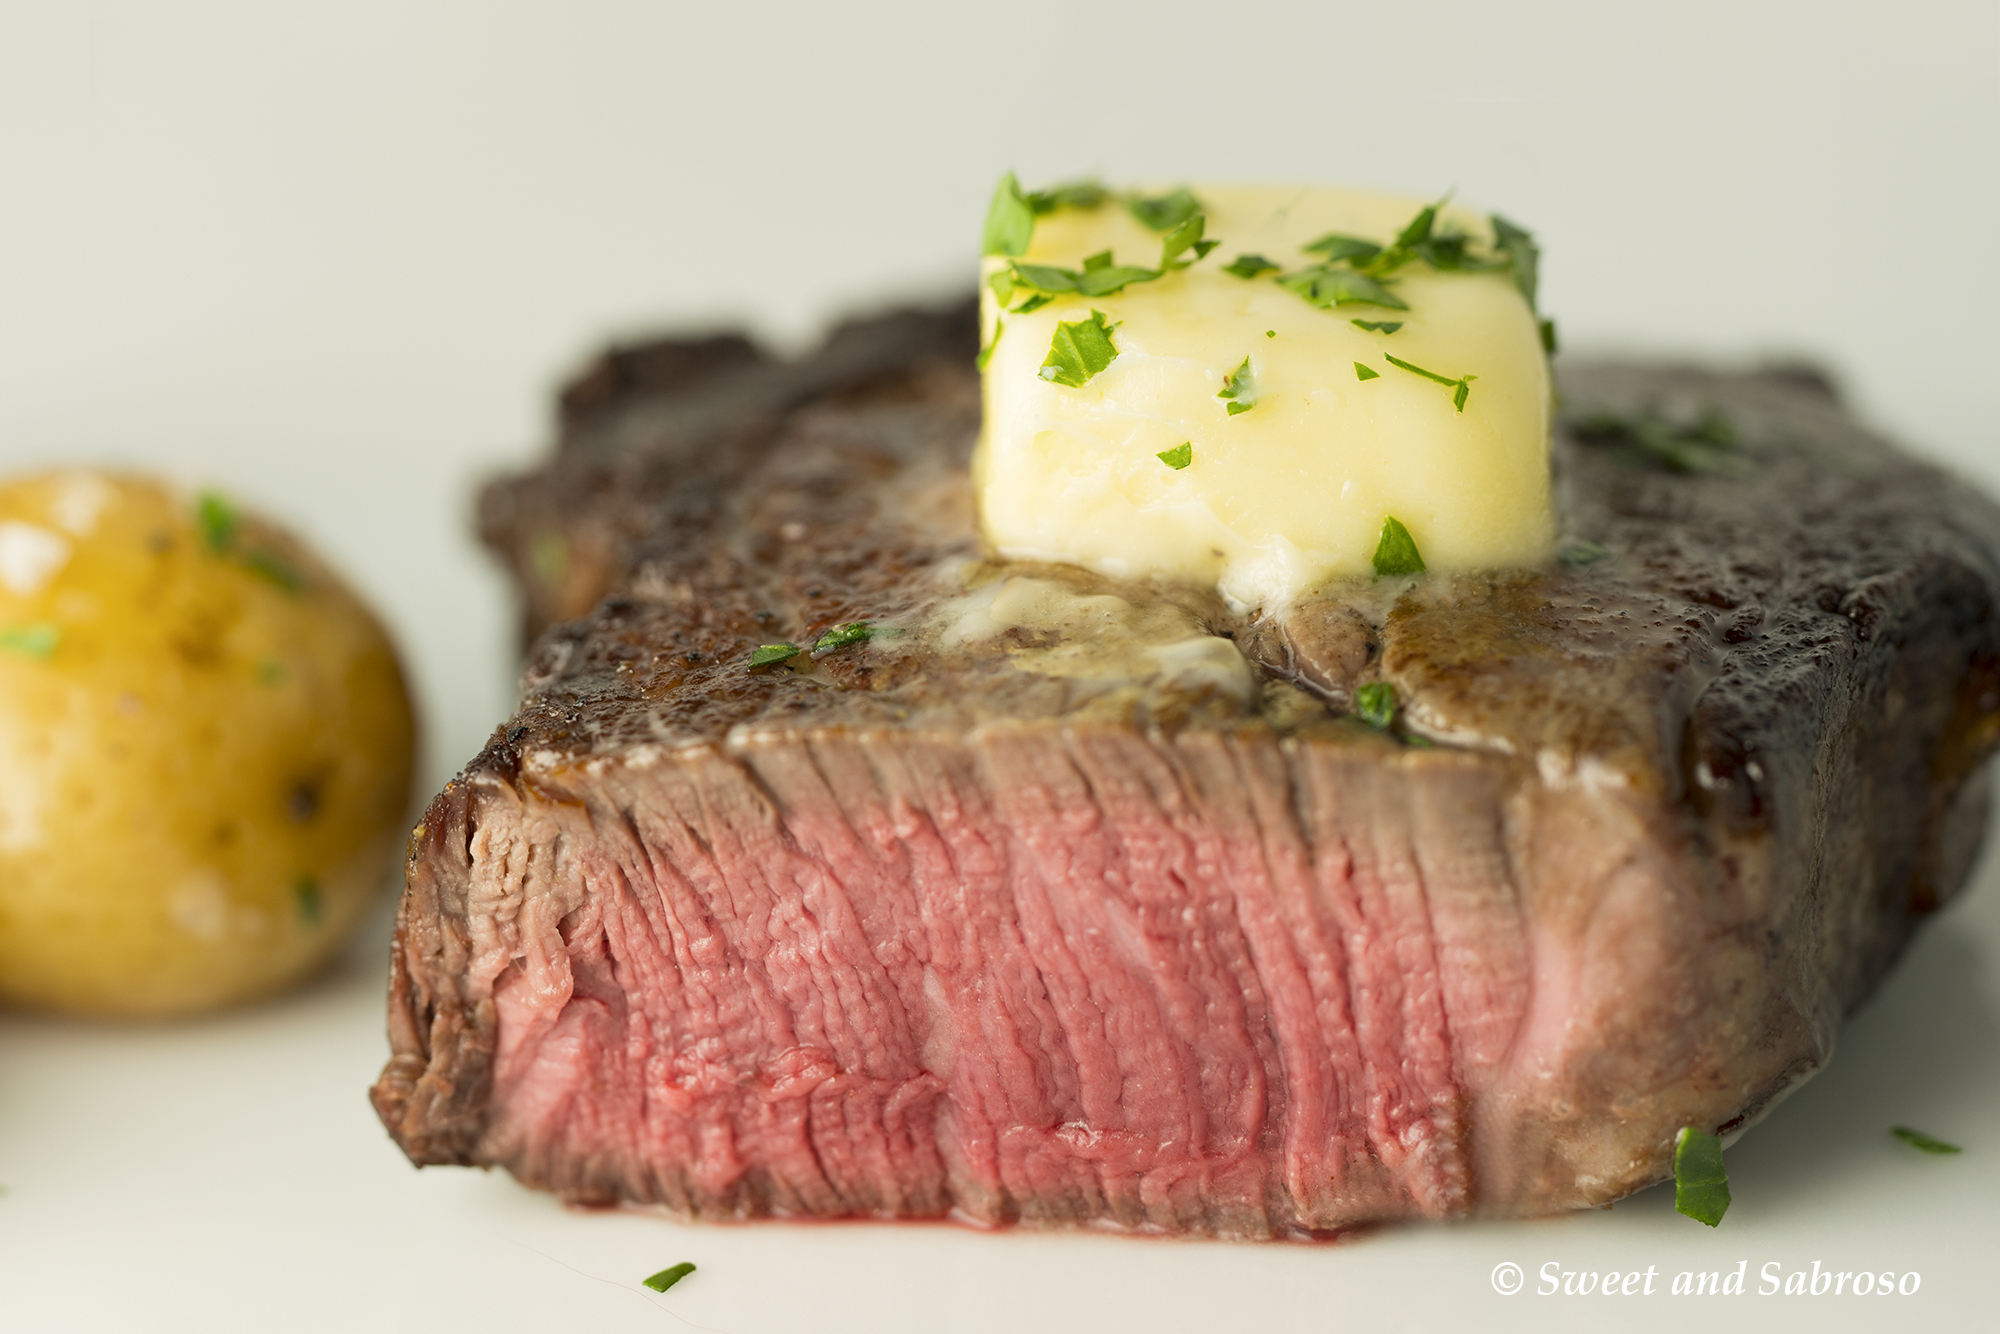 Perfect Pan Seared Restaurant Style Filet Mignon pictured medium-rare with butter and parsley on top